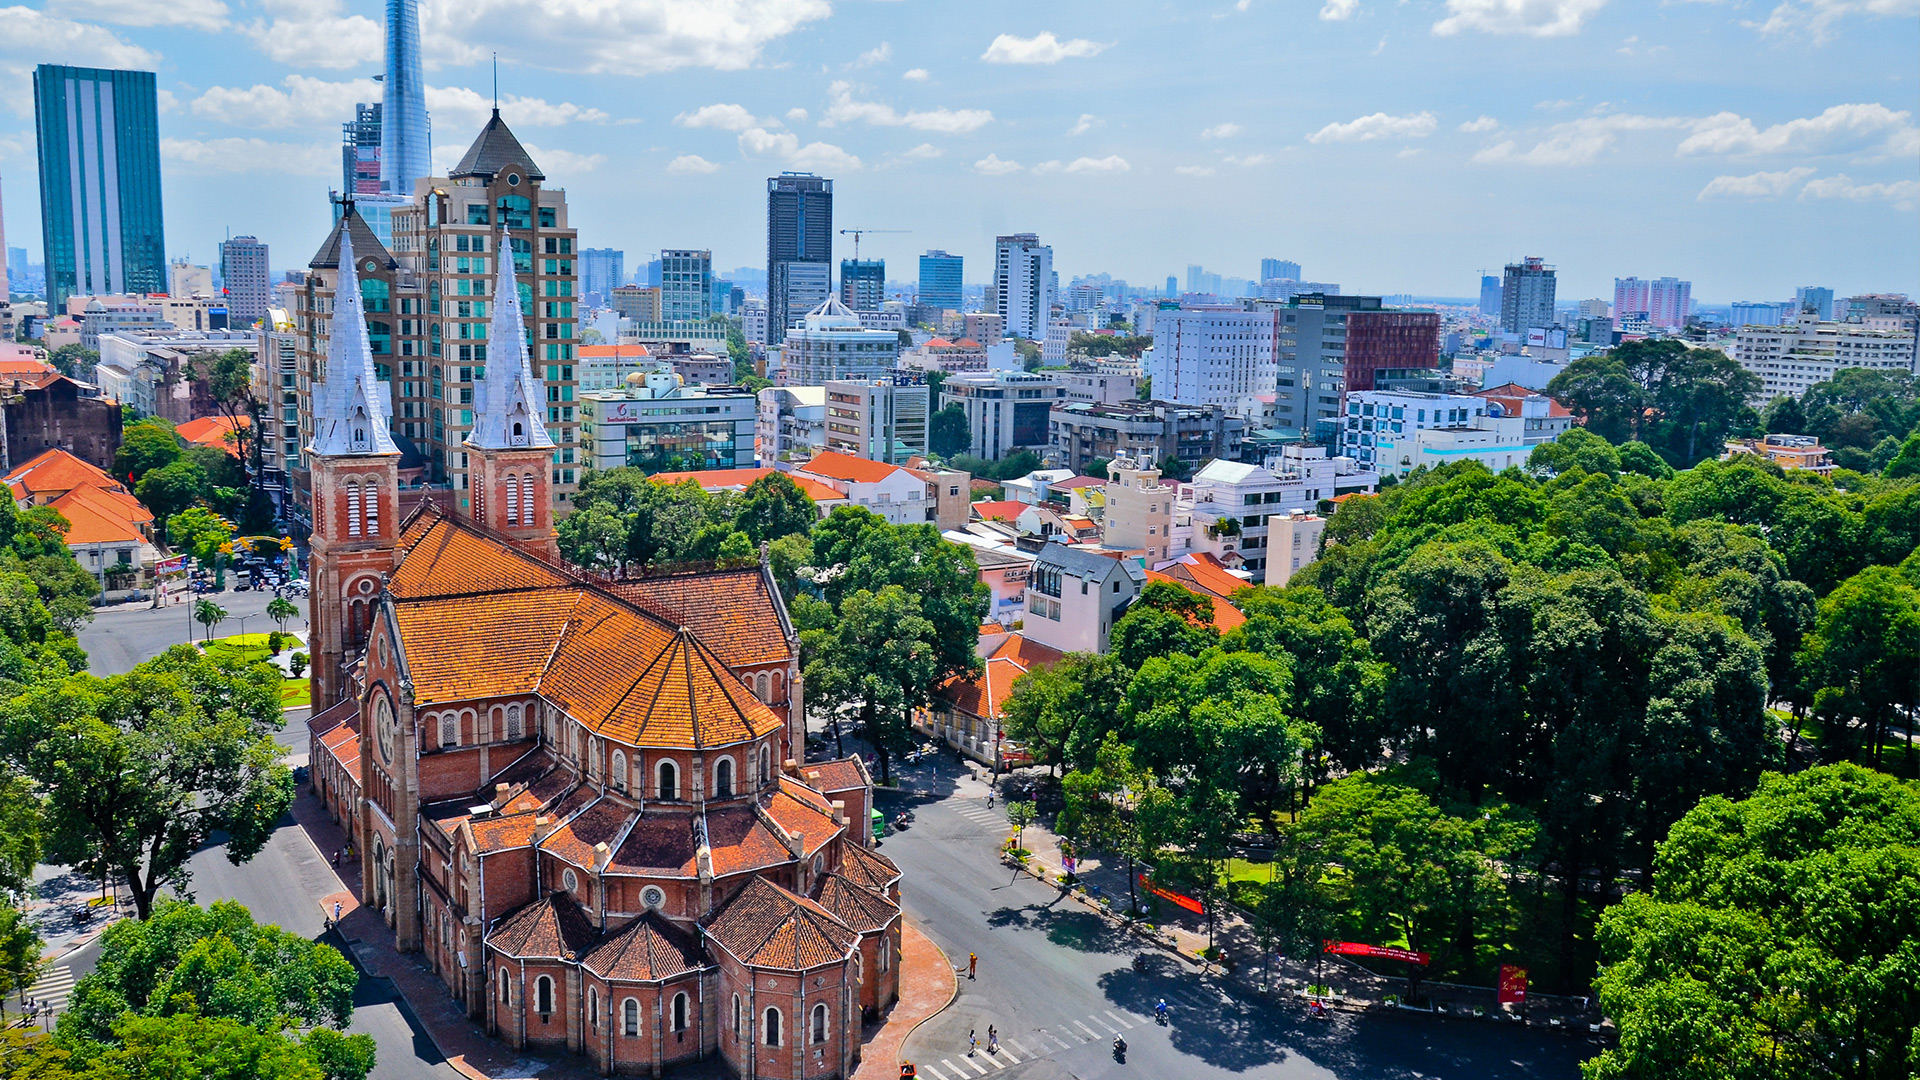 Ho Chi Minh City: Where to stay, where to shop, what to do